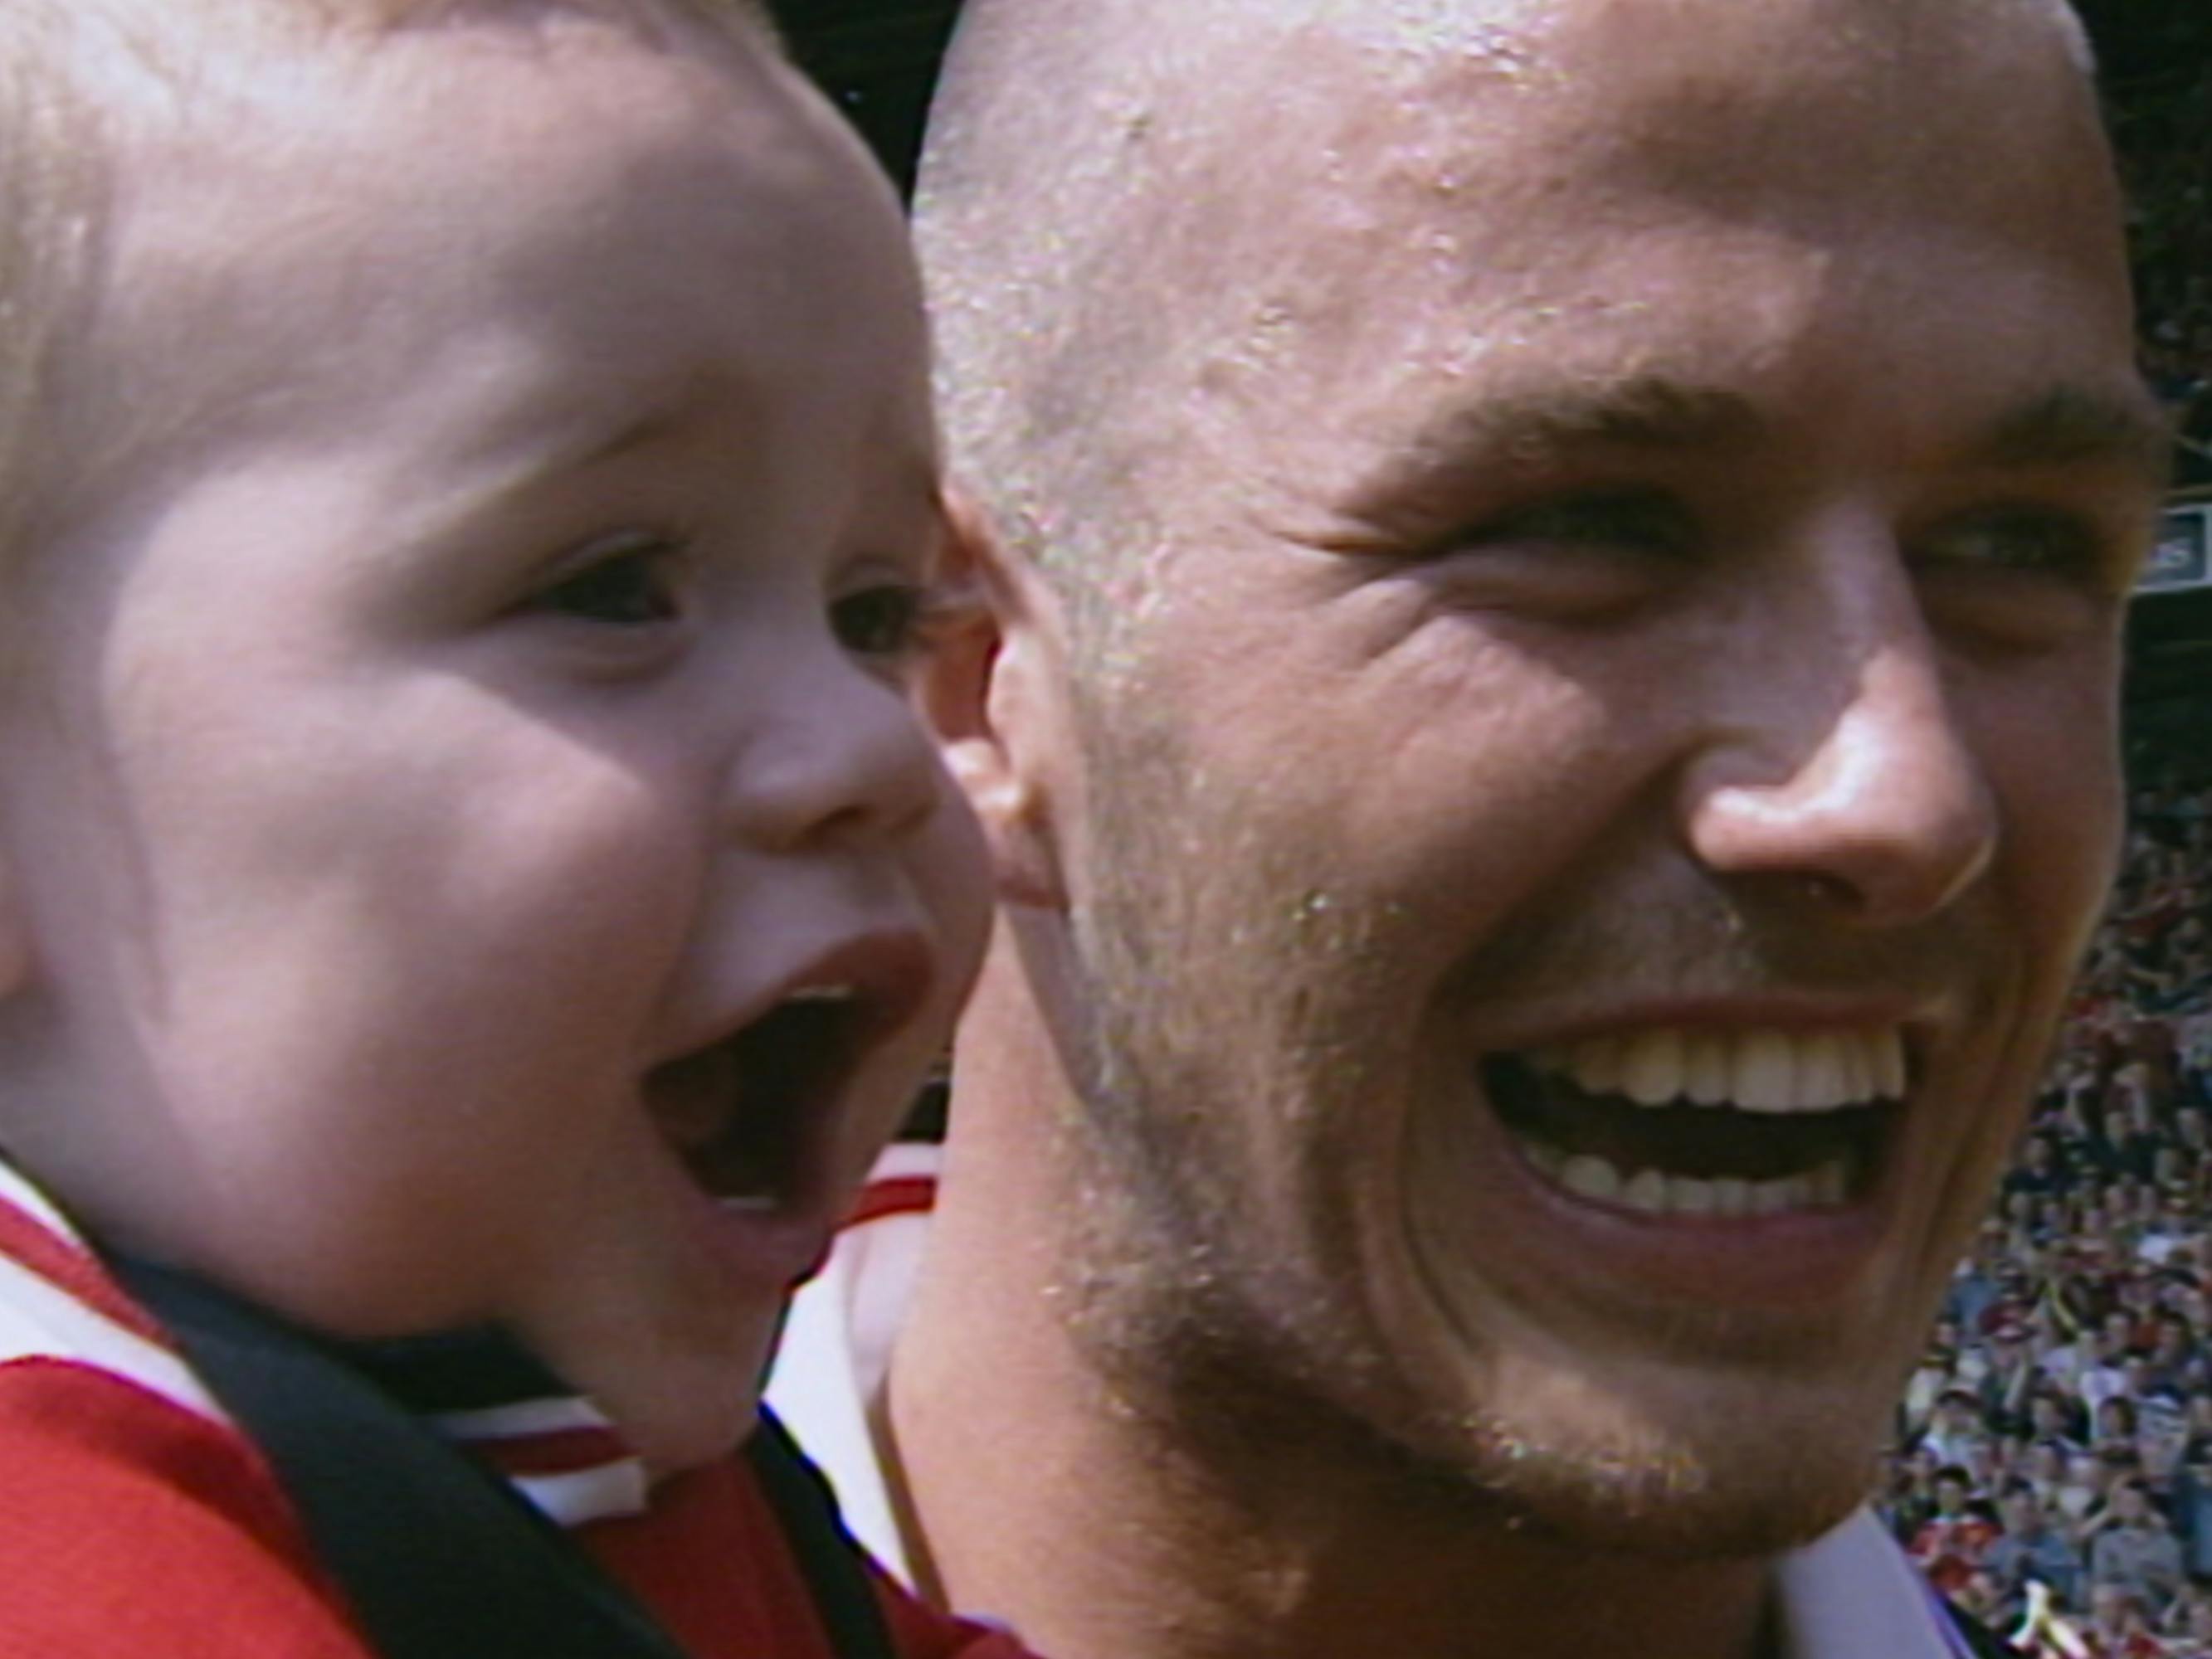 David Beckham holds Brooklyn Beckham in a crowded soccer pitch. Both Beckhams cheer with wide-mouthed smiles, and baby Brooklyn wears white earplugs and looks downright cherubic.